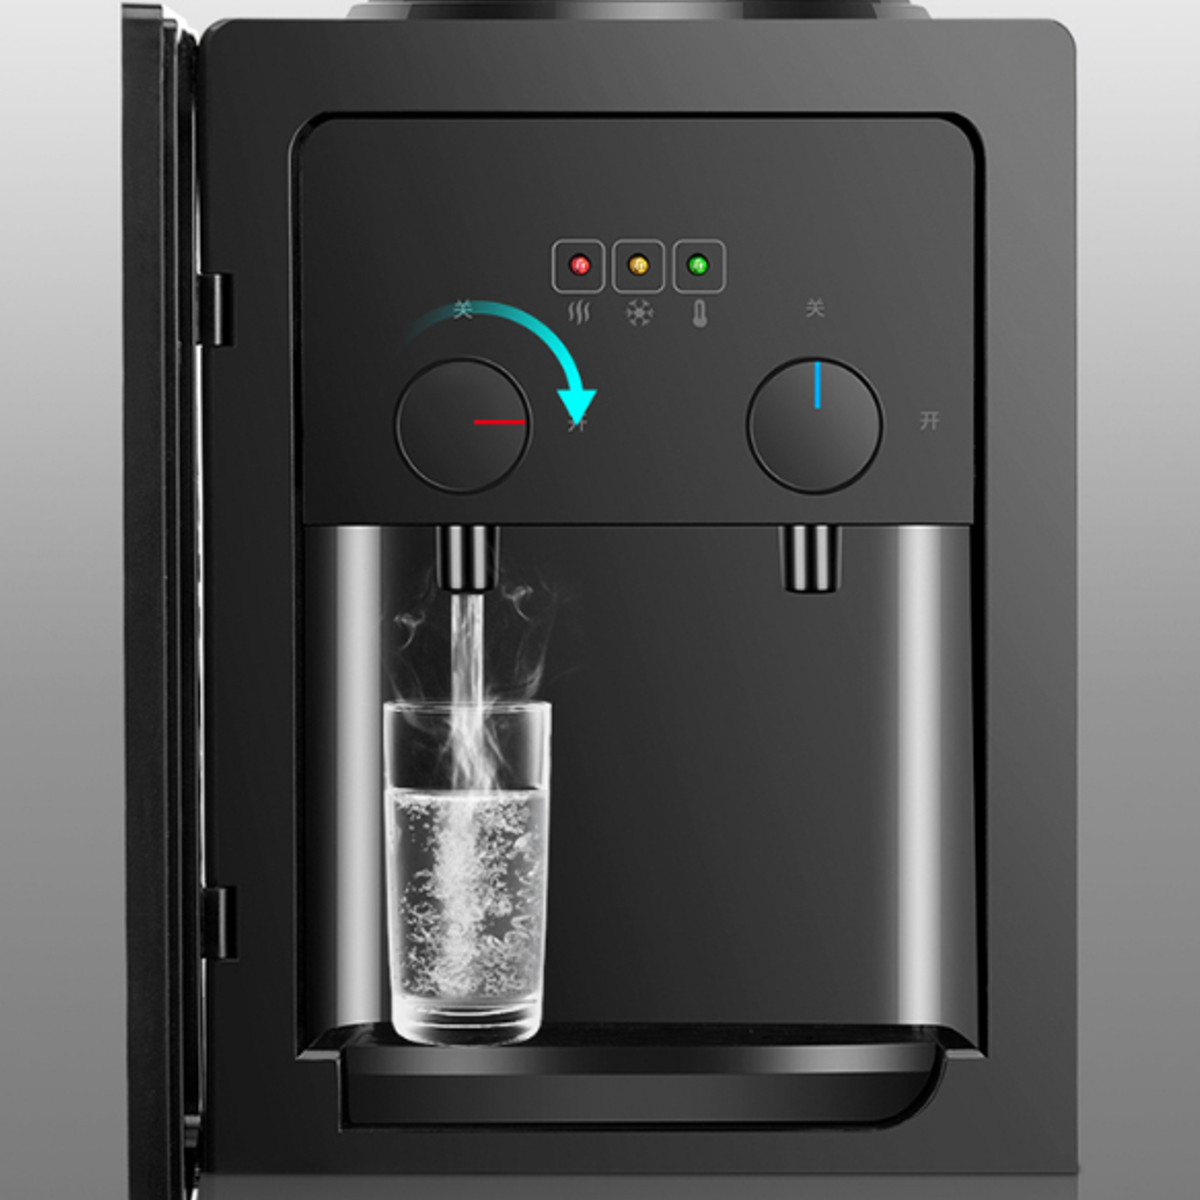 Electric-Water-ColdHot-Dispenser-Heater-Drinking-Fountain-Home-Office-Coffee-1610442